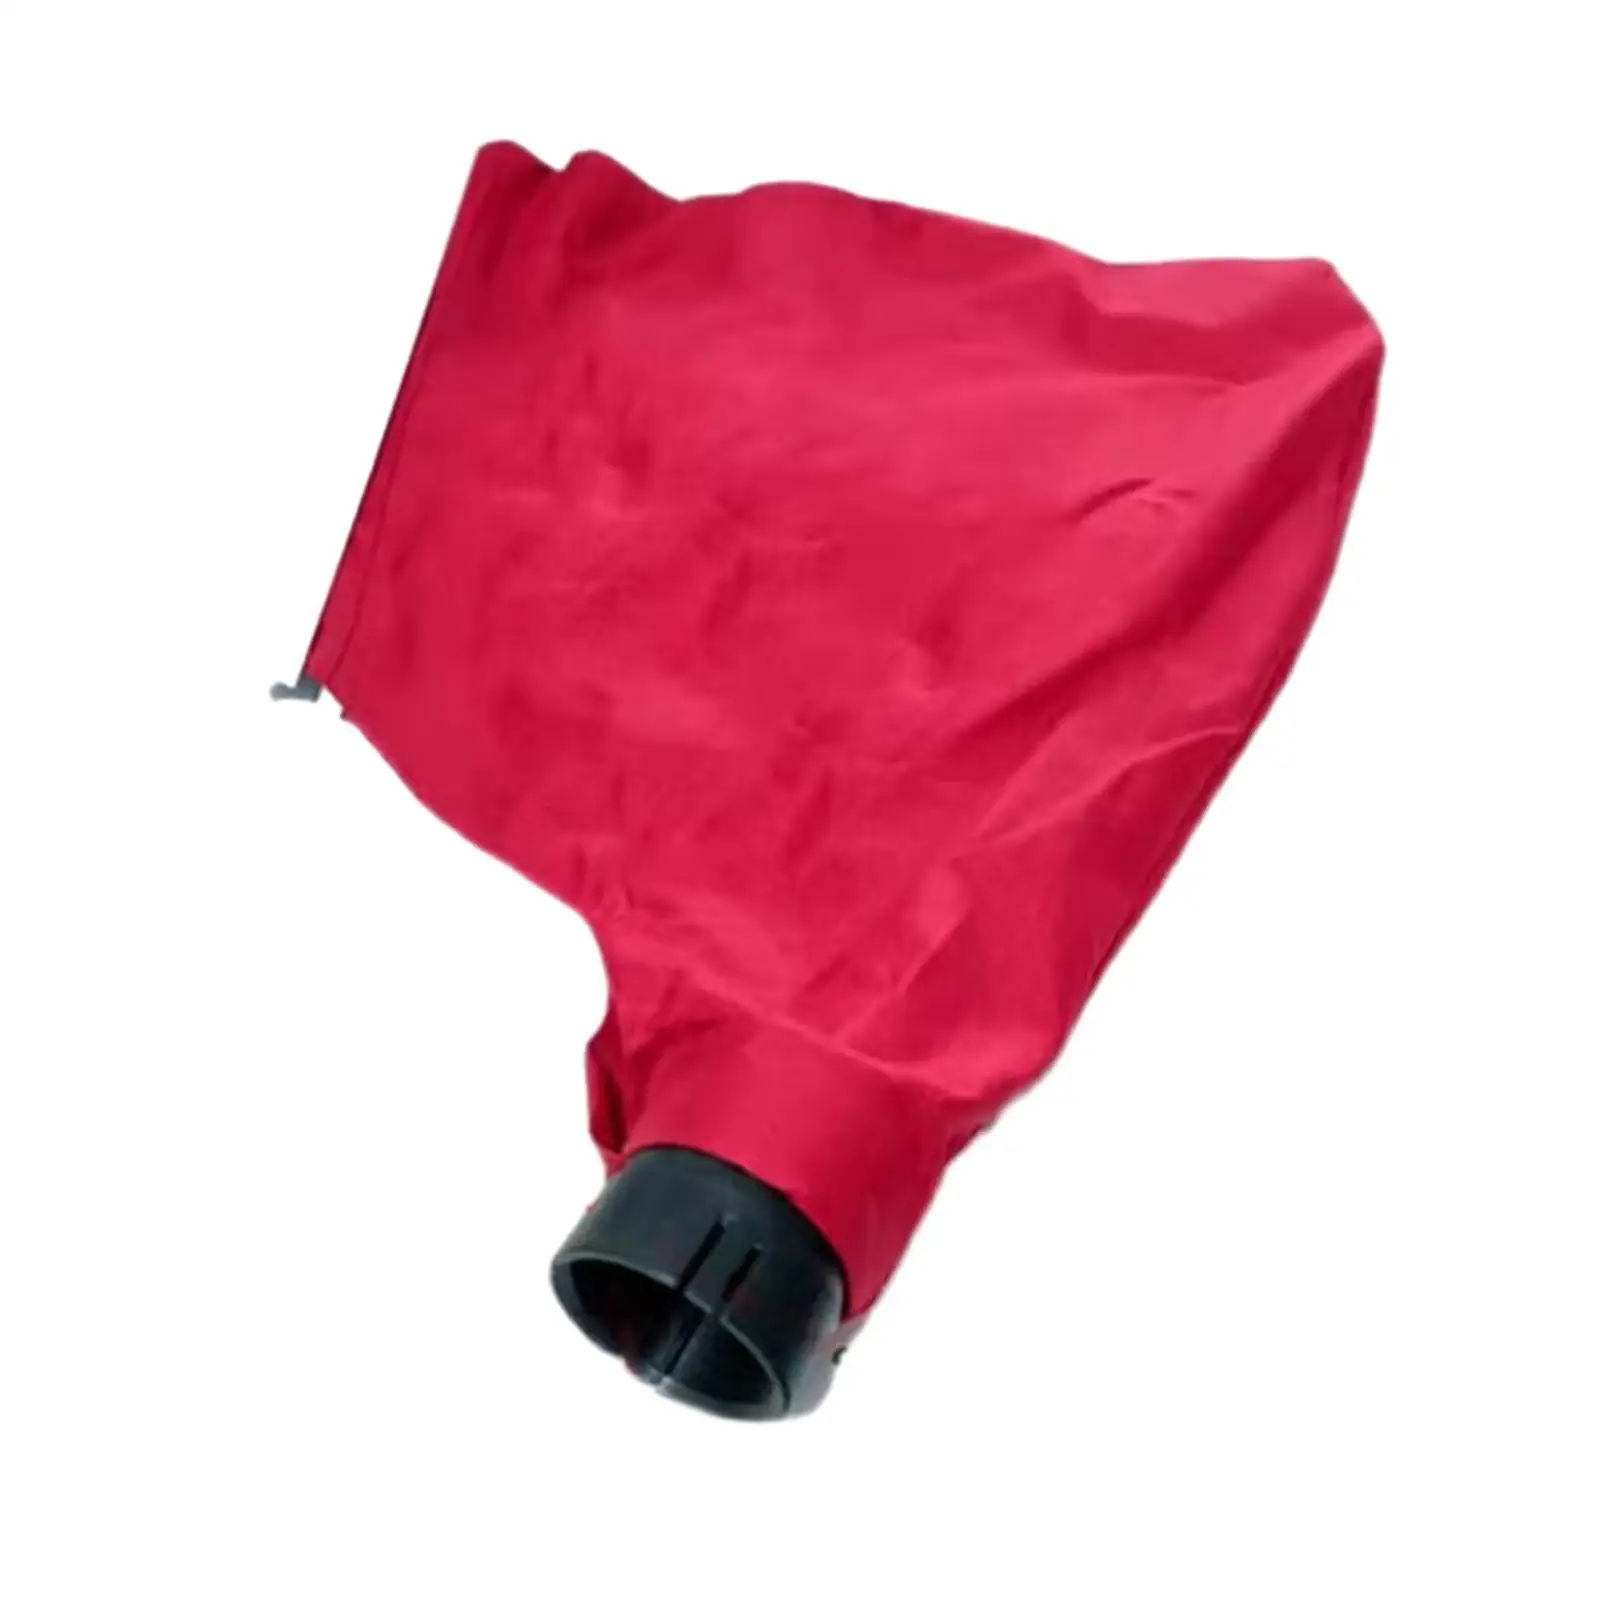 Dust Collection Bag Reusable Accessories Anti Dust Cover Bag for 9403